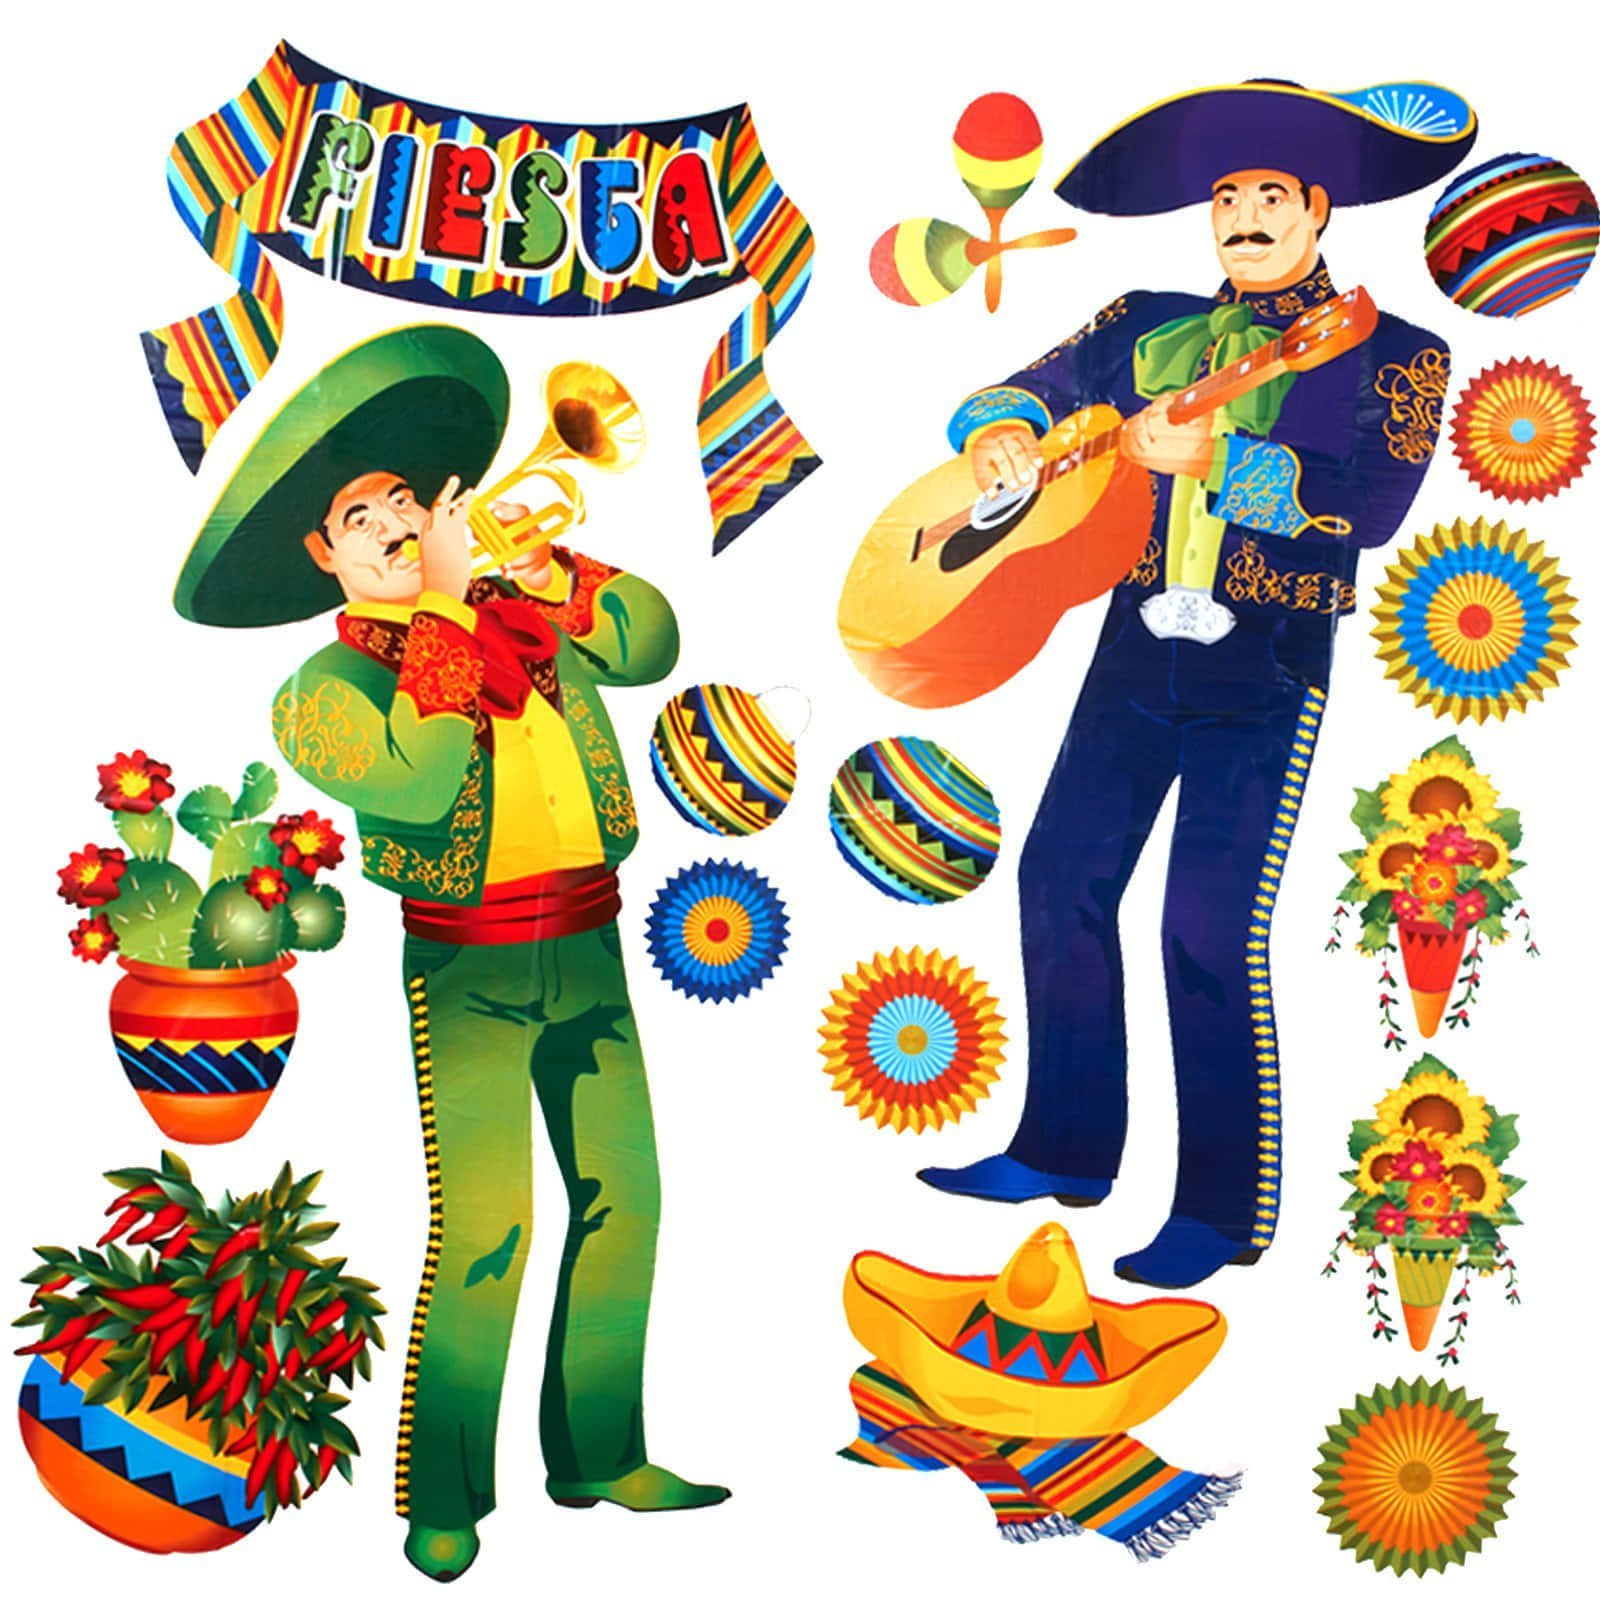 The Beauty of Colorful Mexican Culture